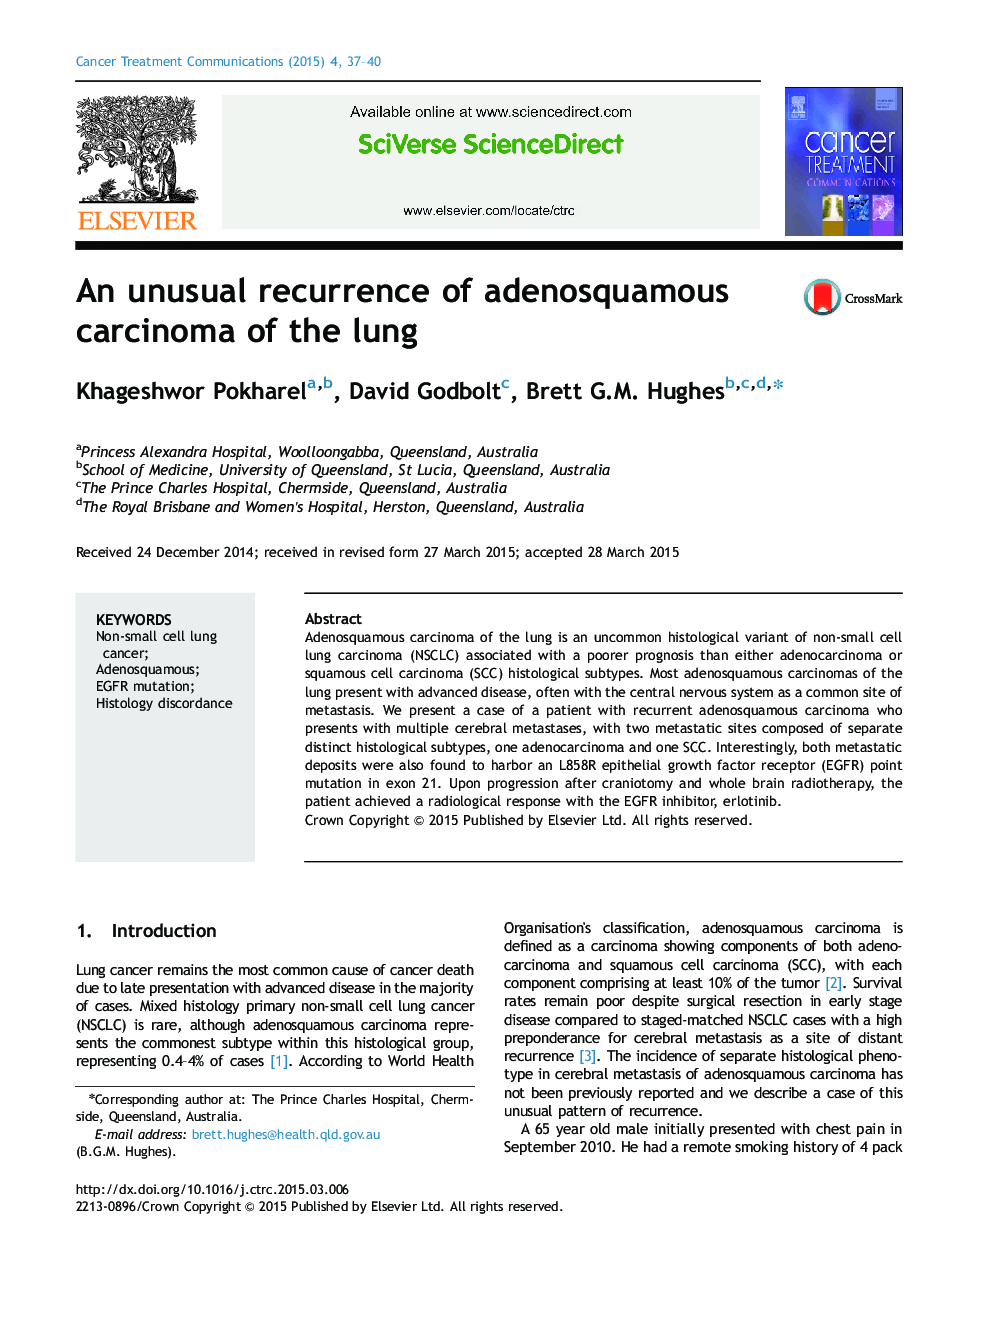 An unusual recurrence of adenosquamous carcinoma of the lung